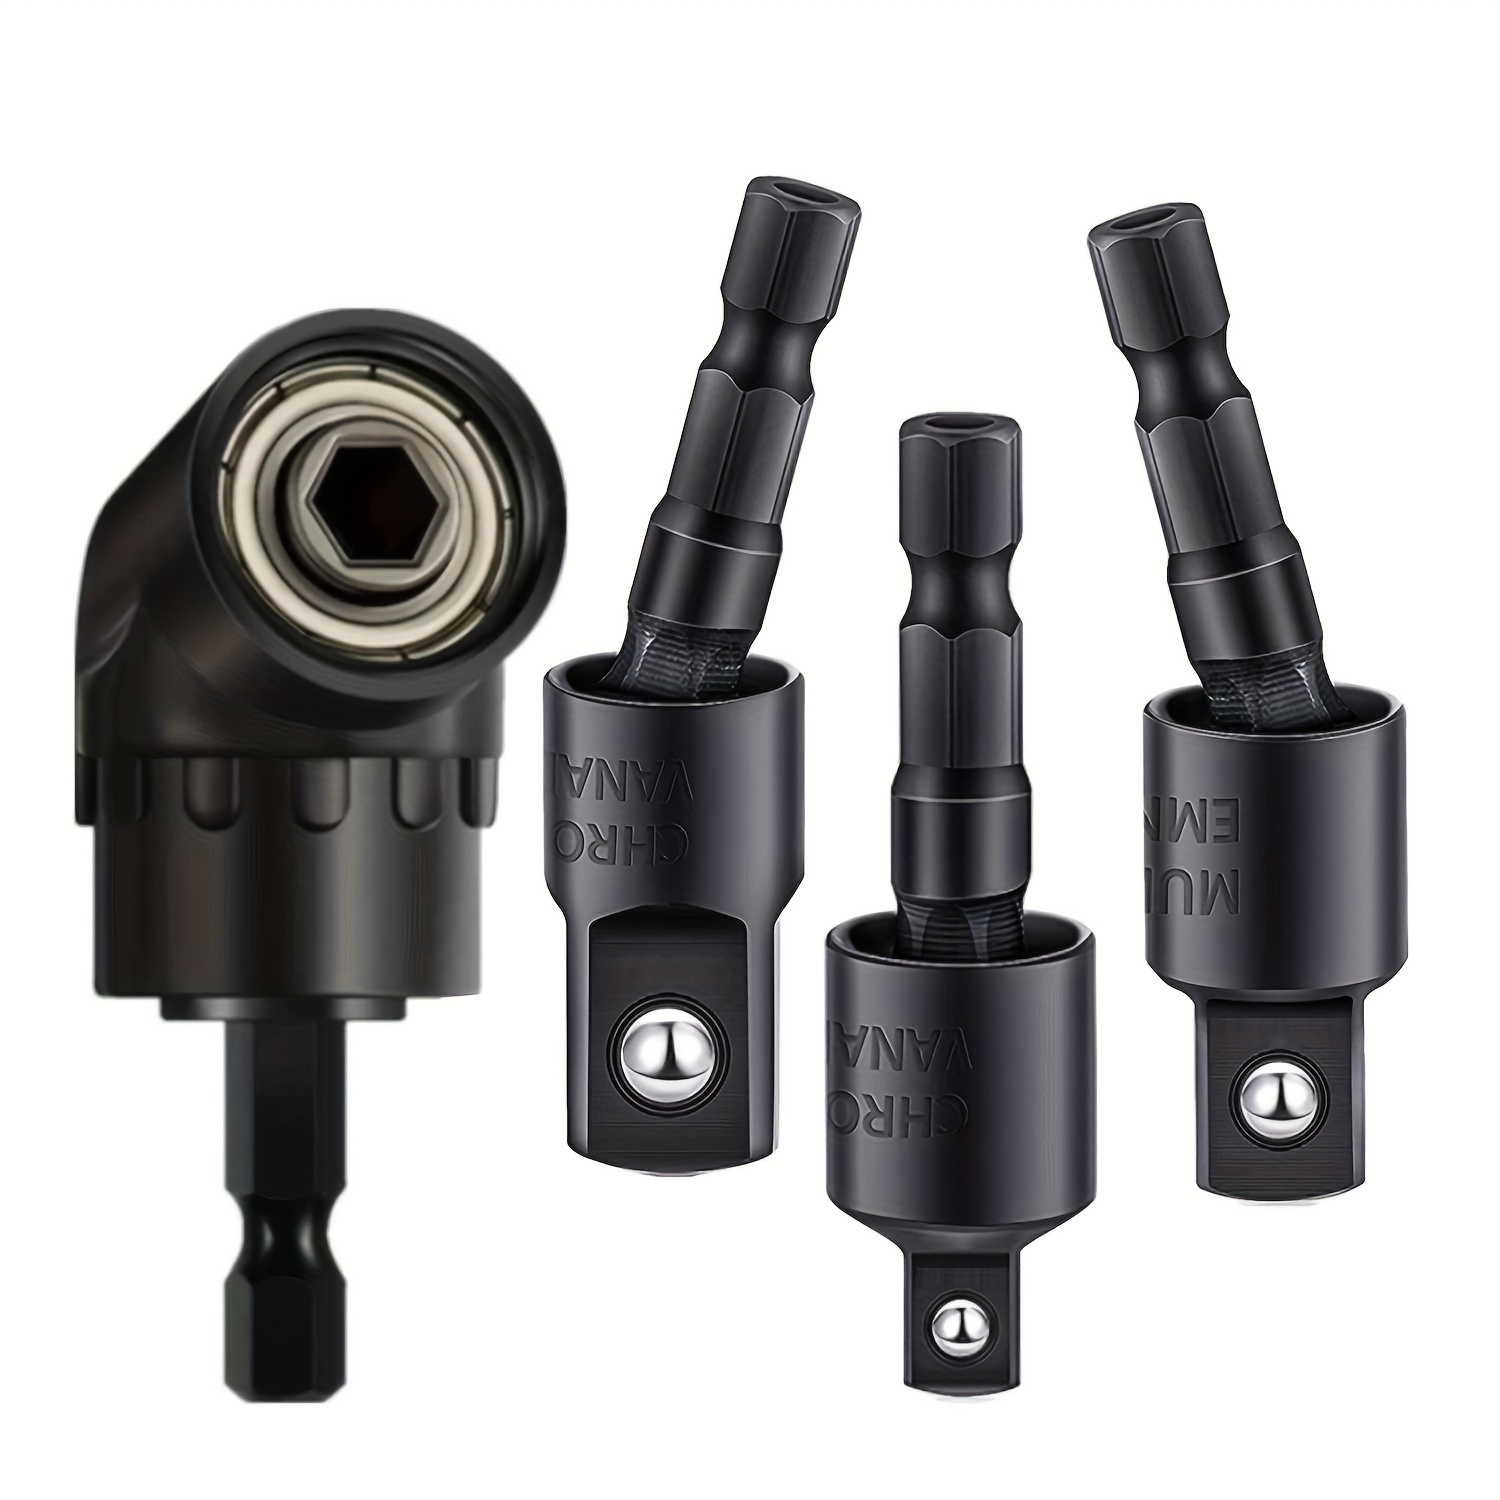 

4pcs Power Drill Socket Adapter Set - 360° Rotatable Hex Shank Impact Driver Socket Adapters - 1/4 3/8 1/2 - 105° Right Angle Screwdriver Drill Bit Holder - Black Color